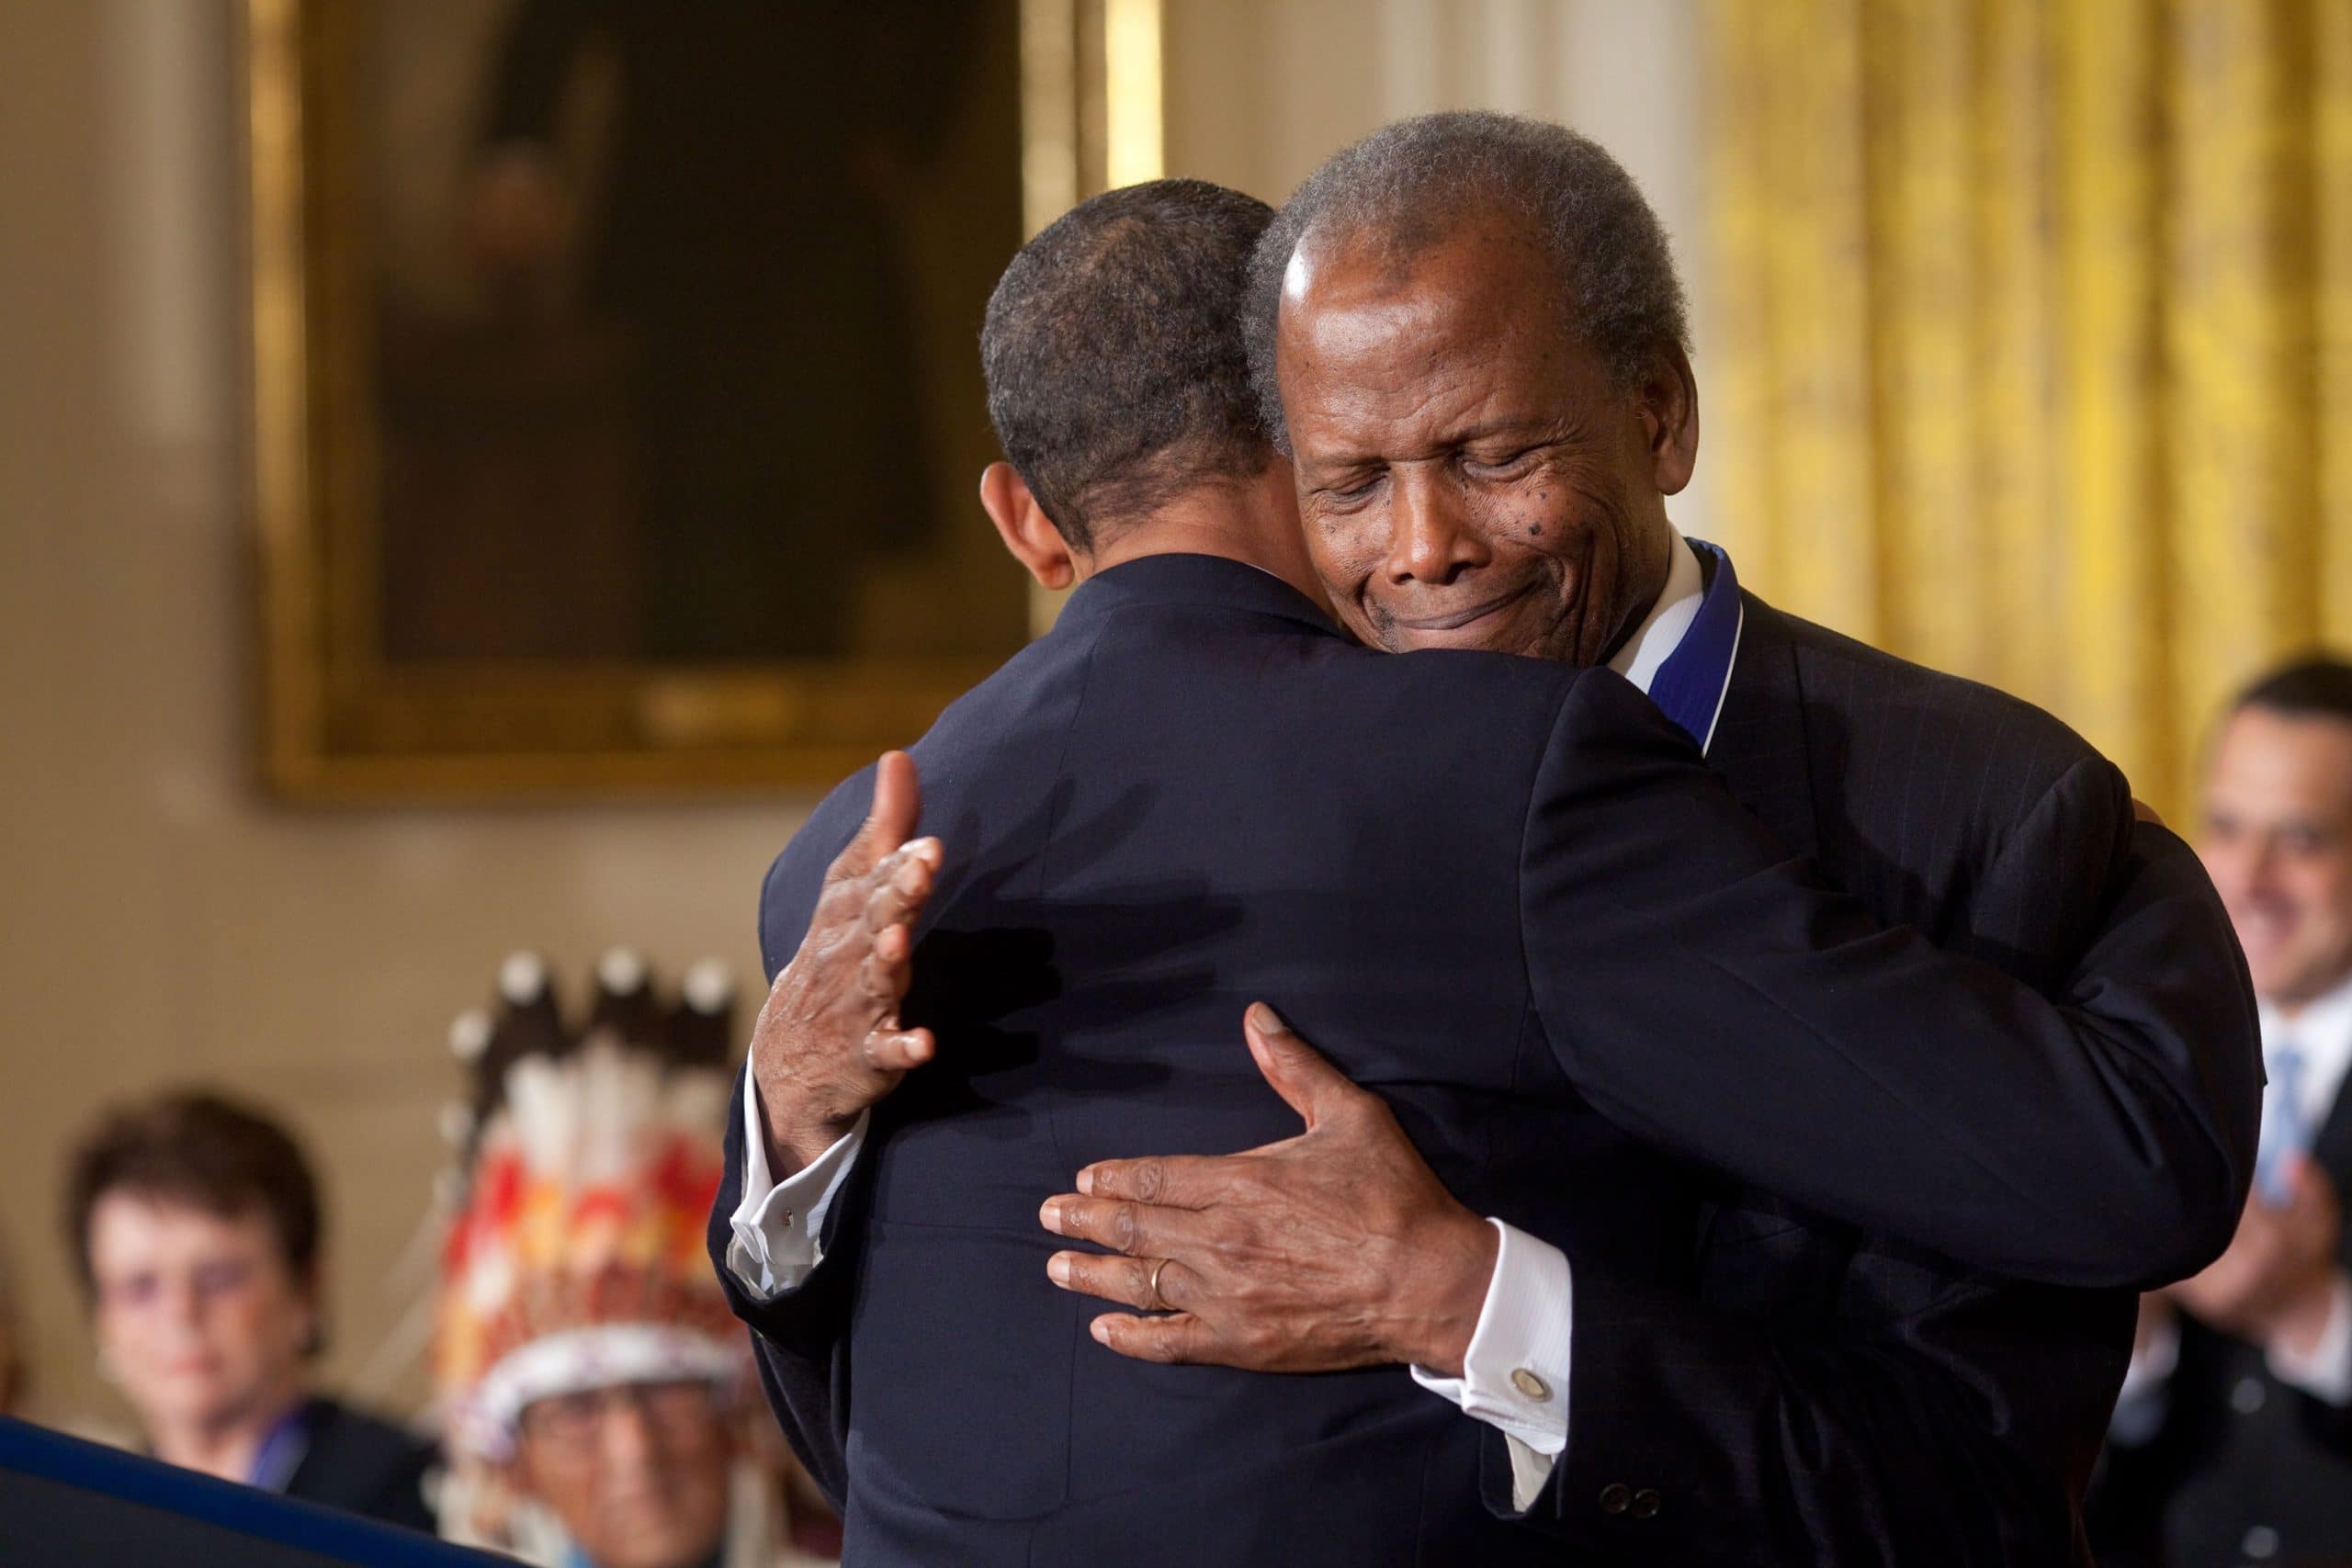 President Obama hugs Sidney Poitier during the award ceremony for the Presidential Medal of Freedom in the White House East Room